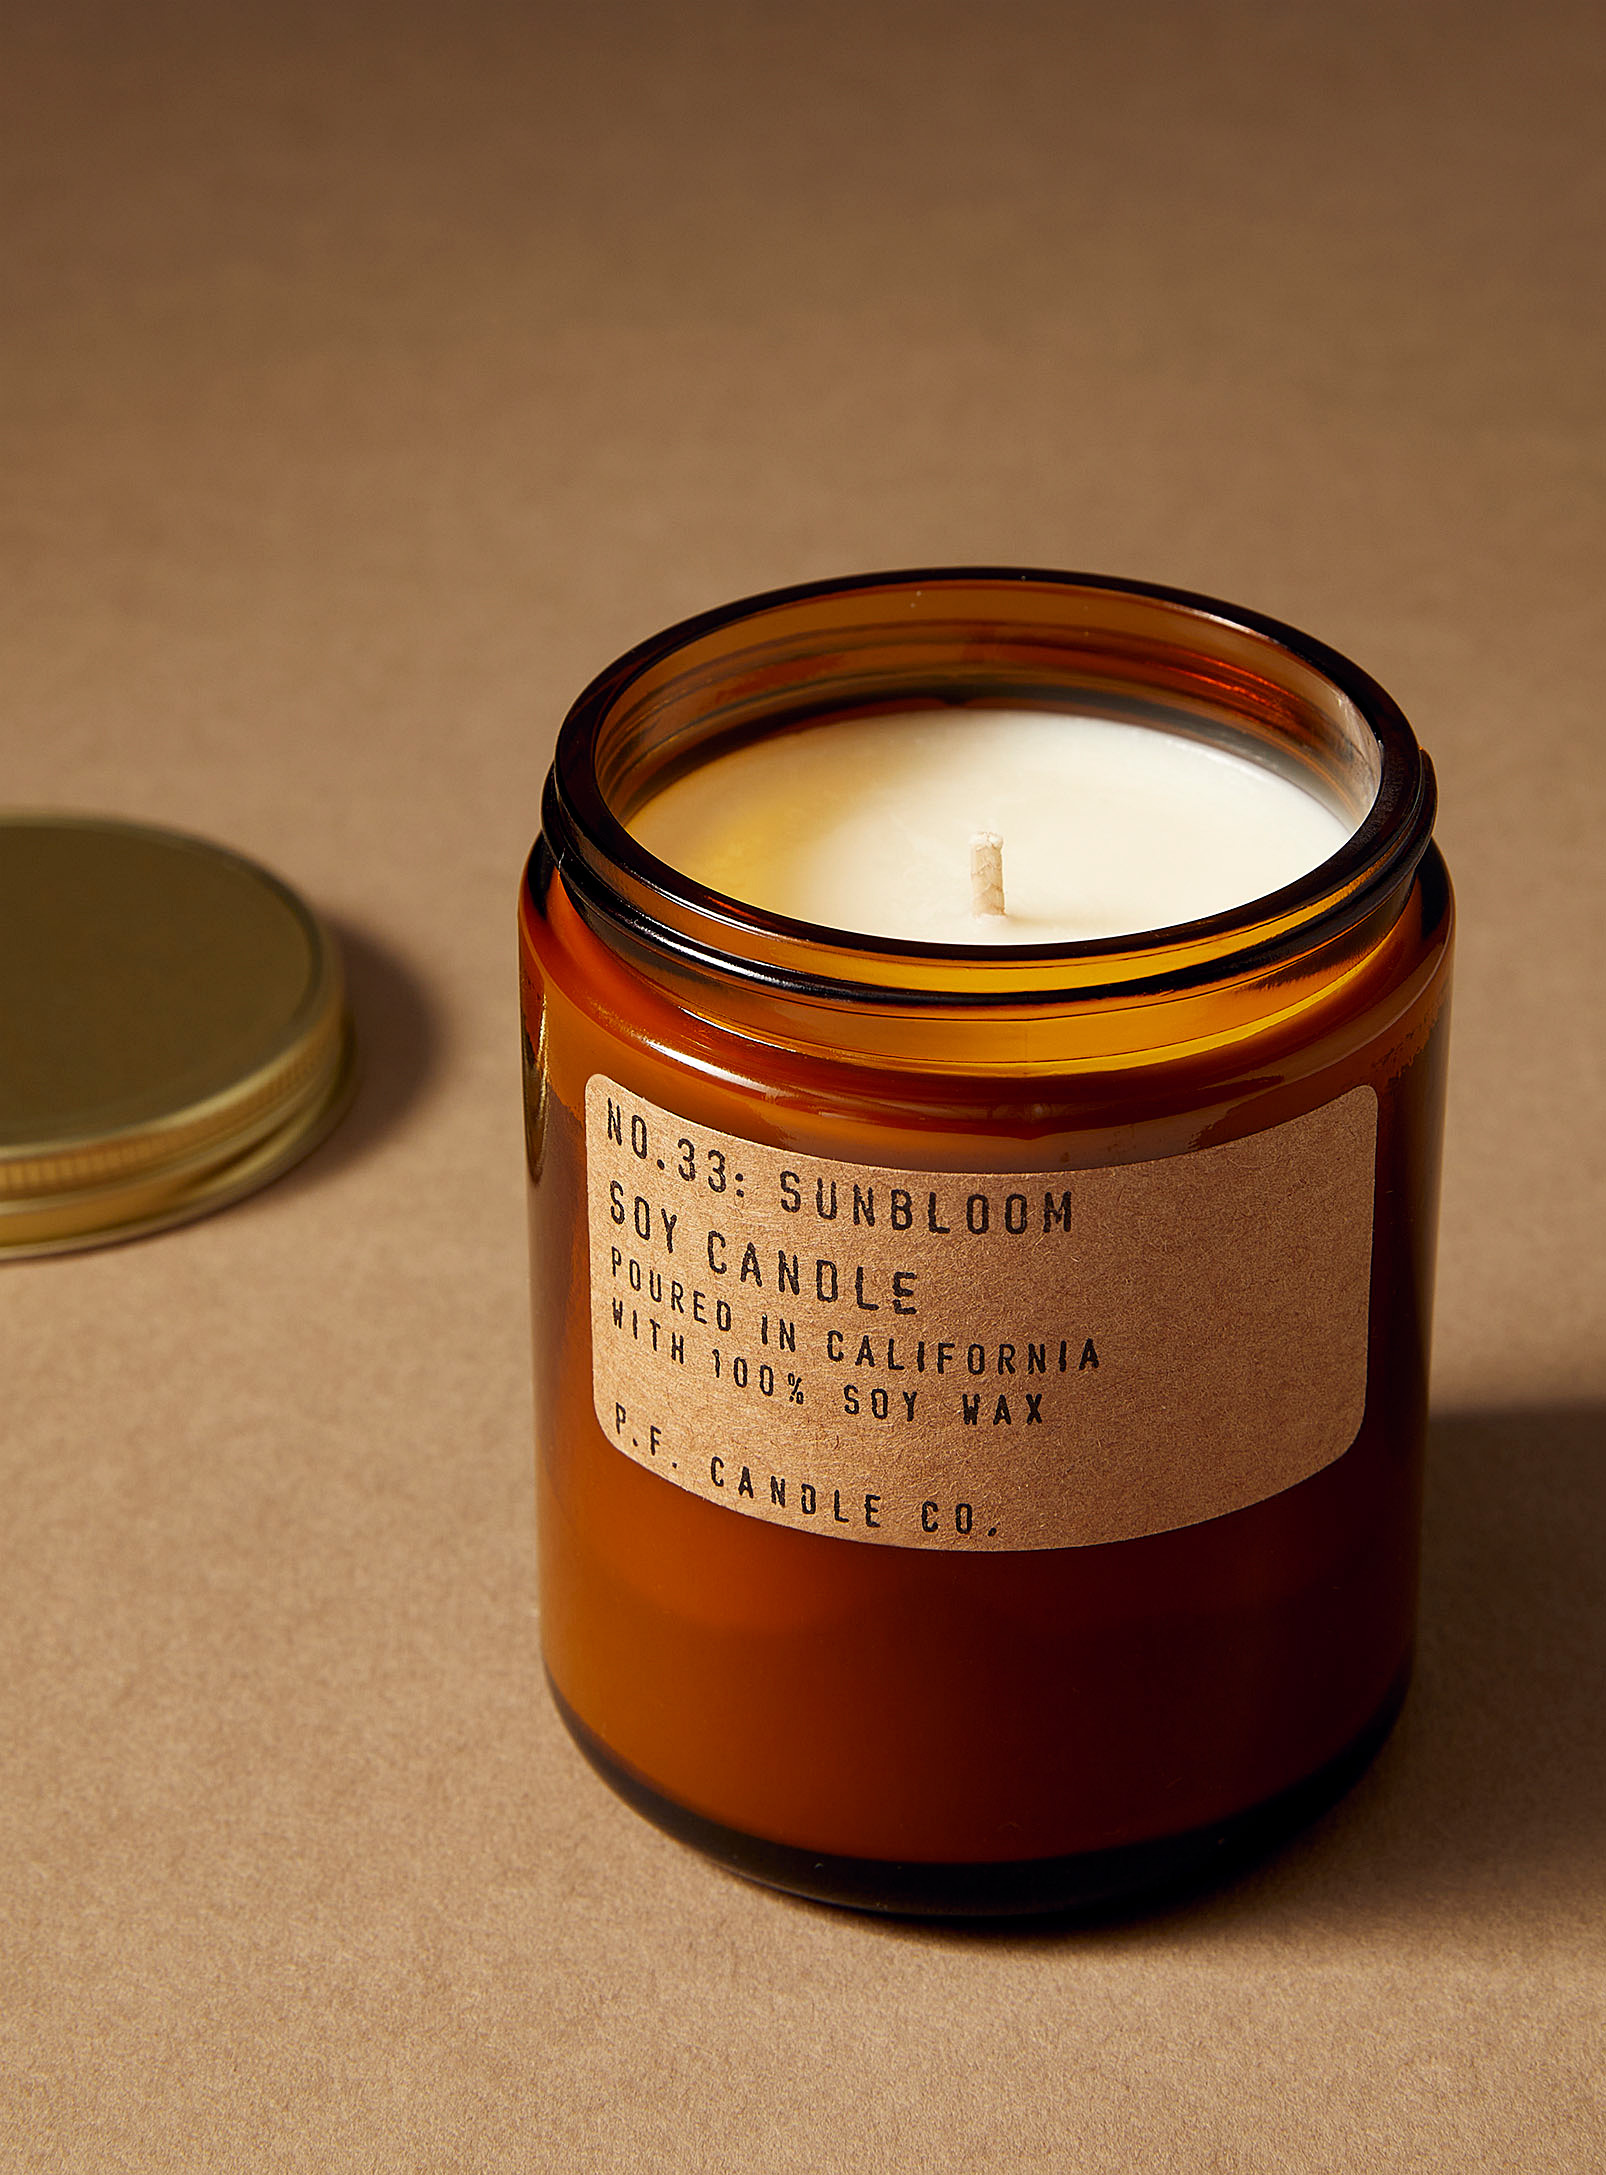 P.f Candle Co. Sunbloom Scented Candle In Transparent